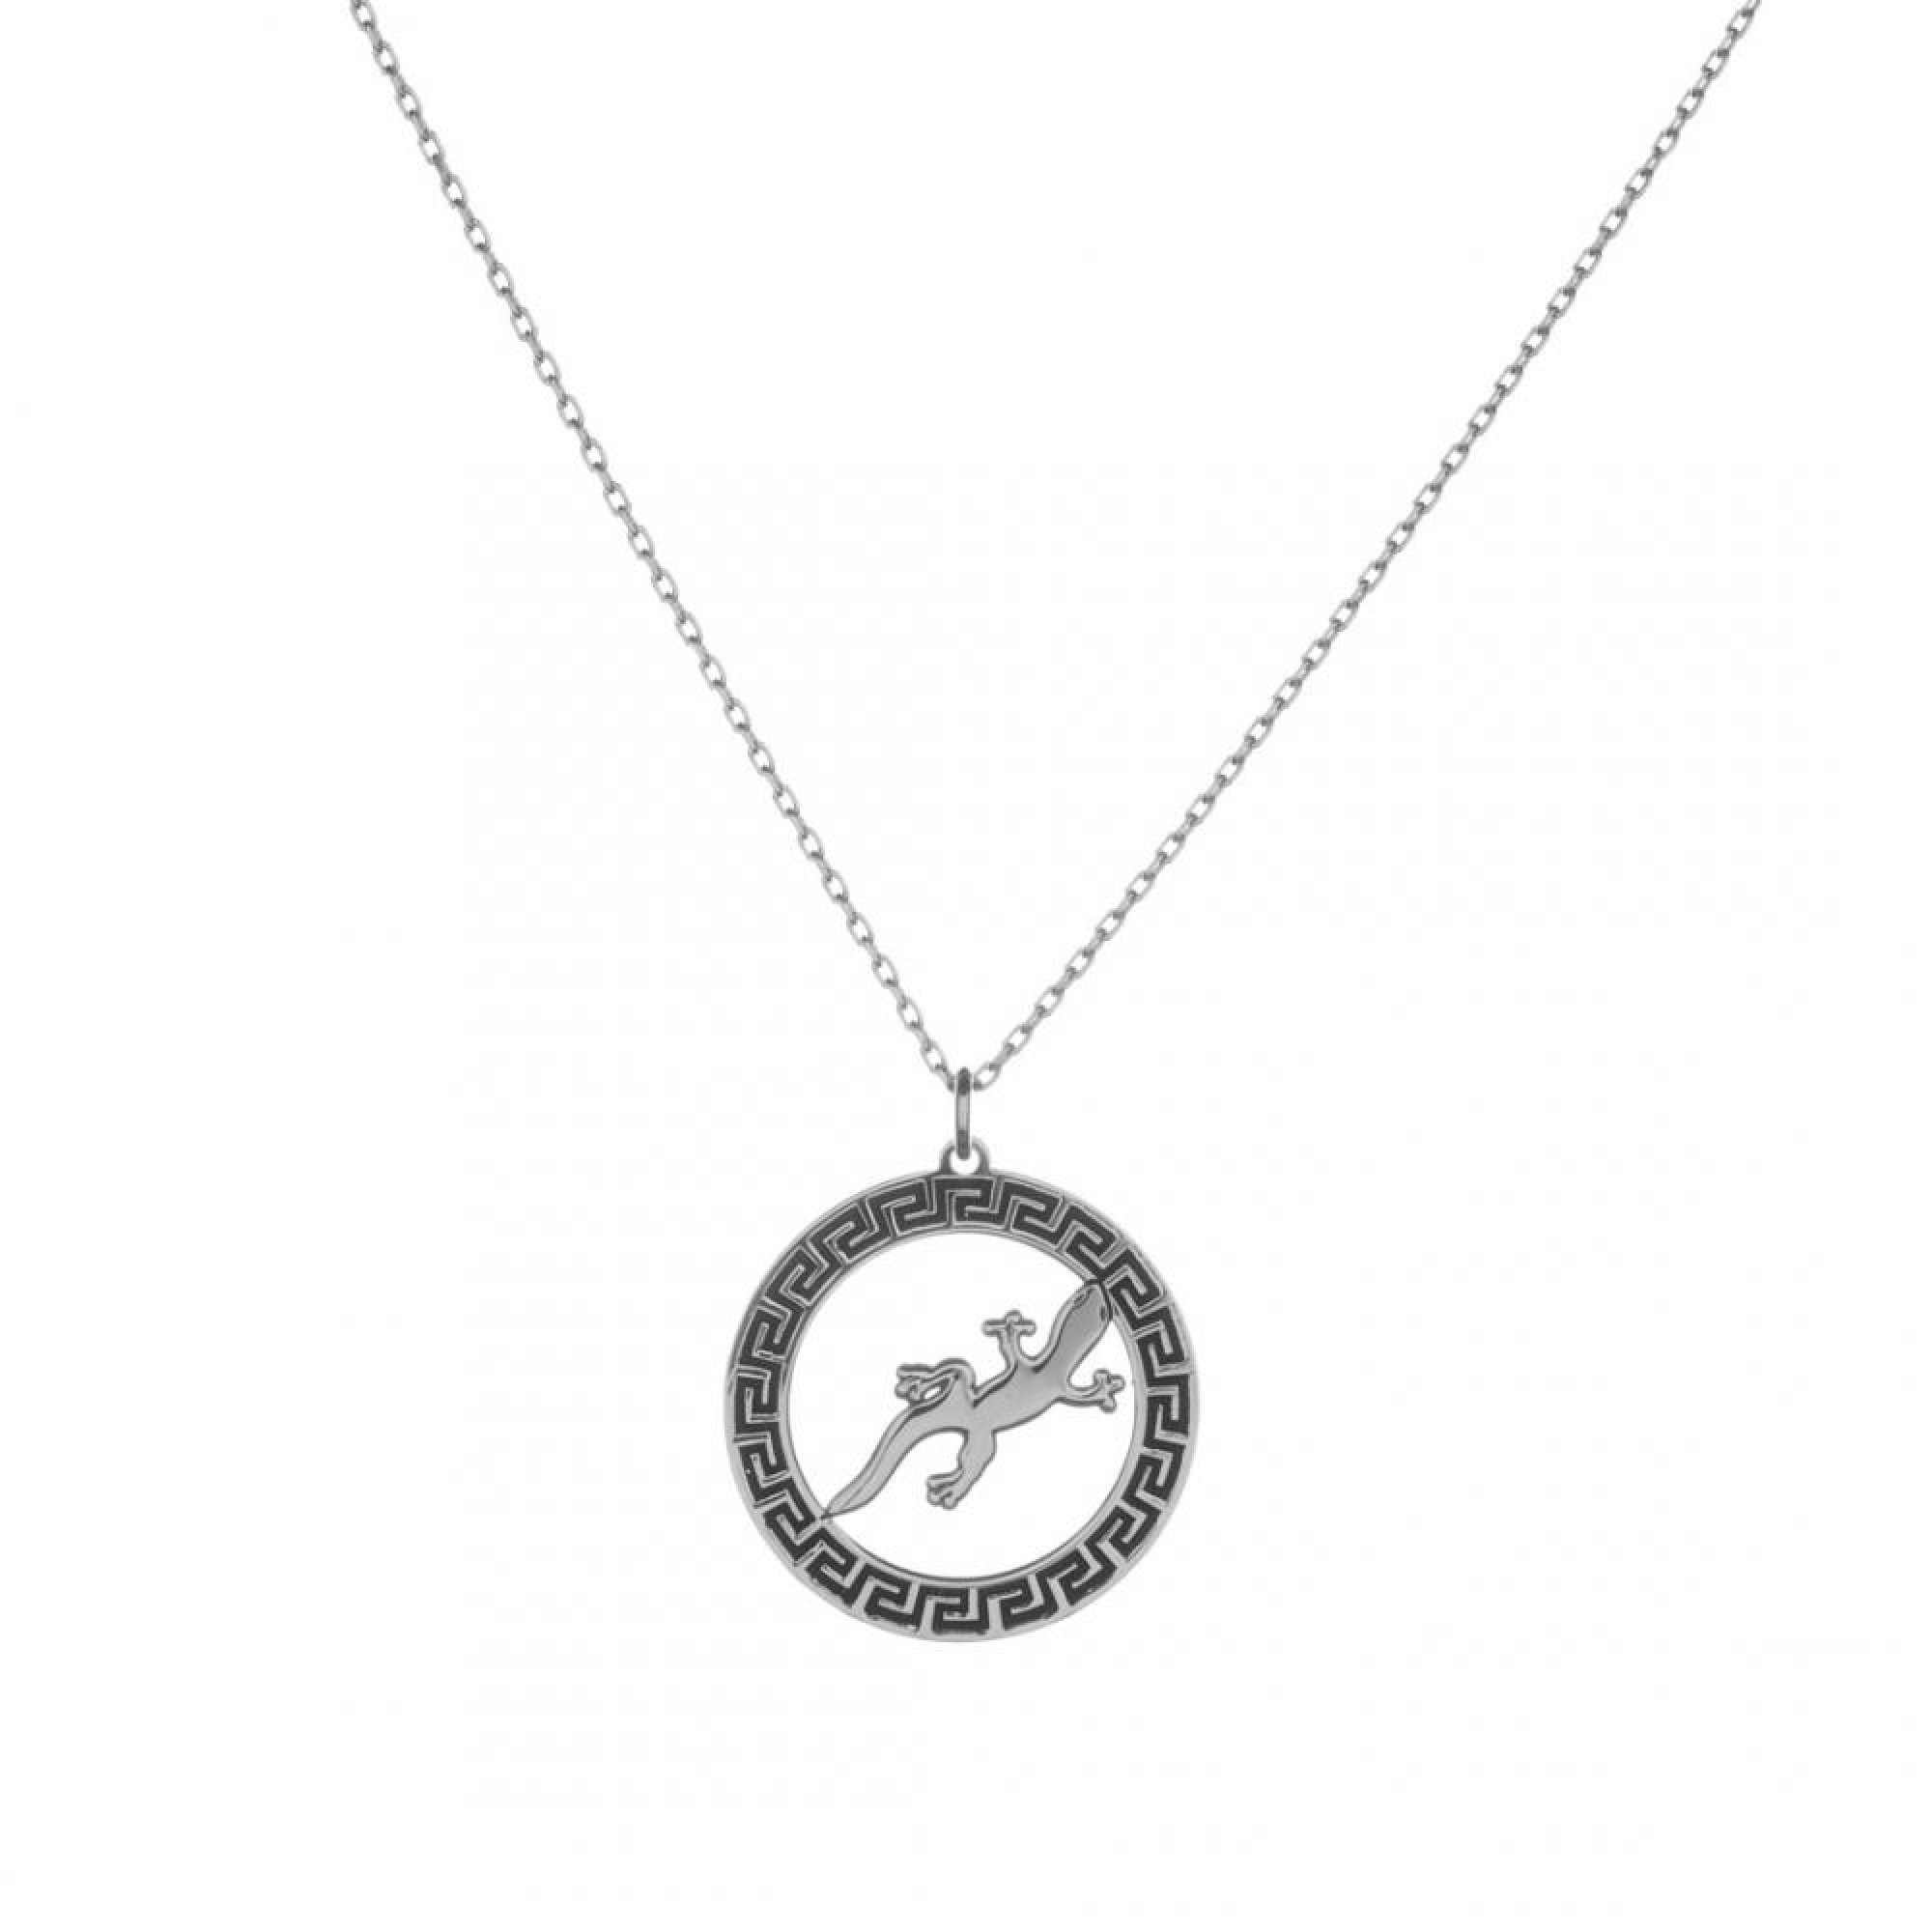 Lizard necklace with meander